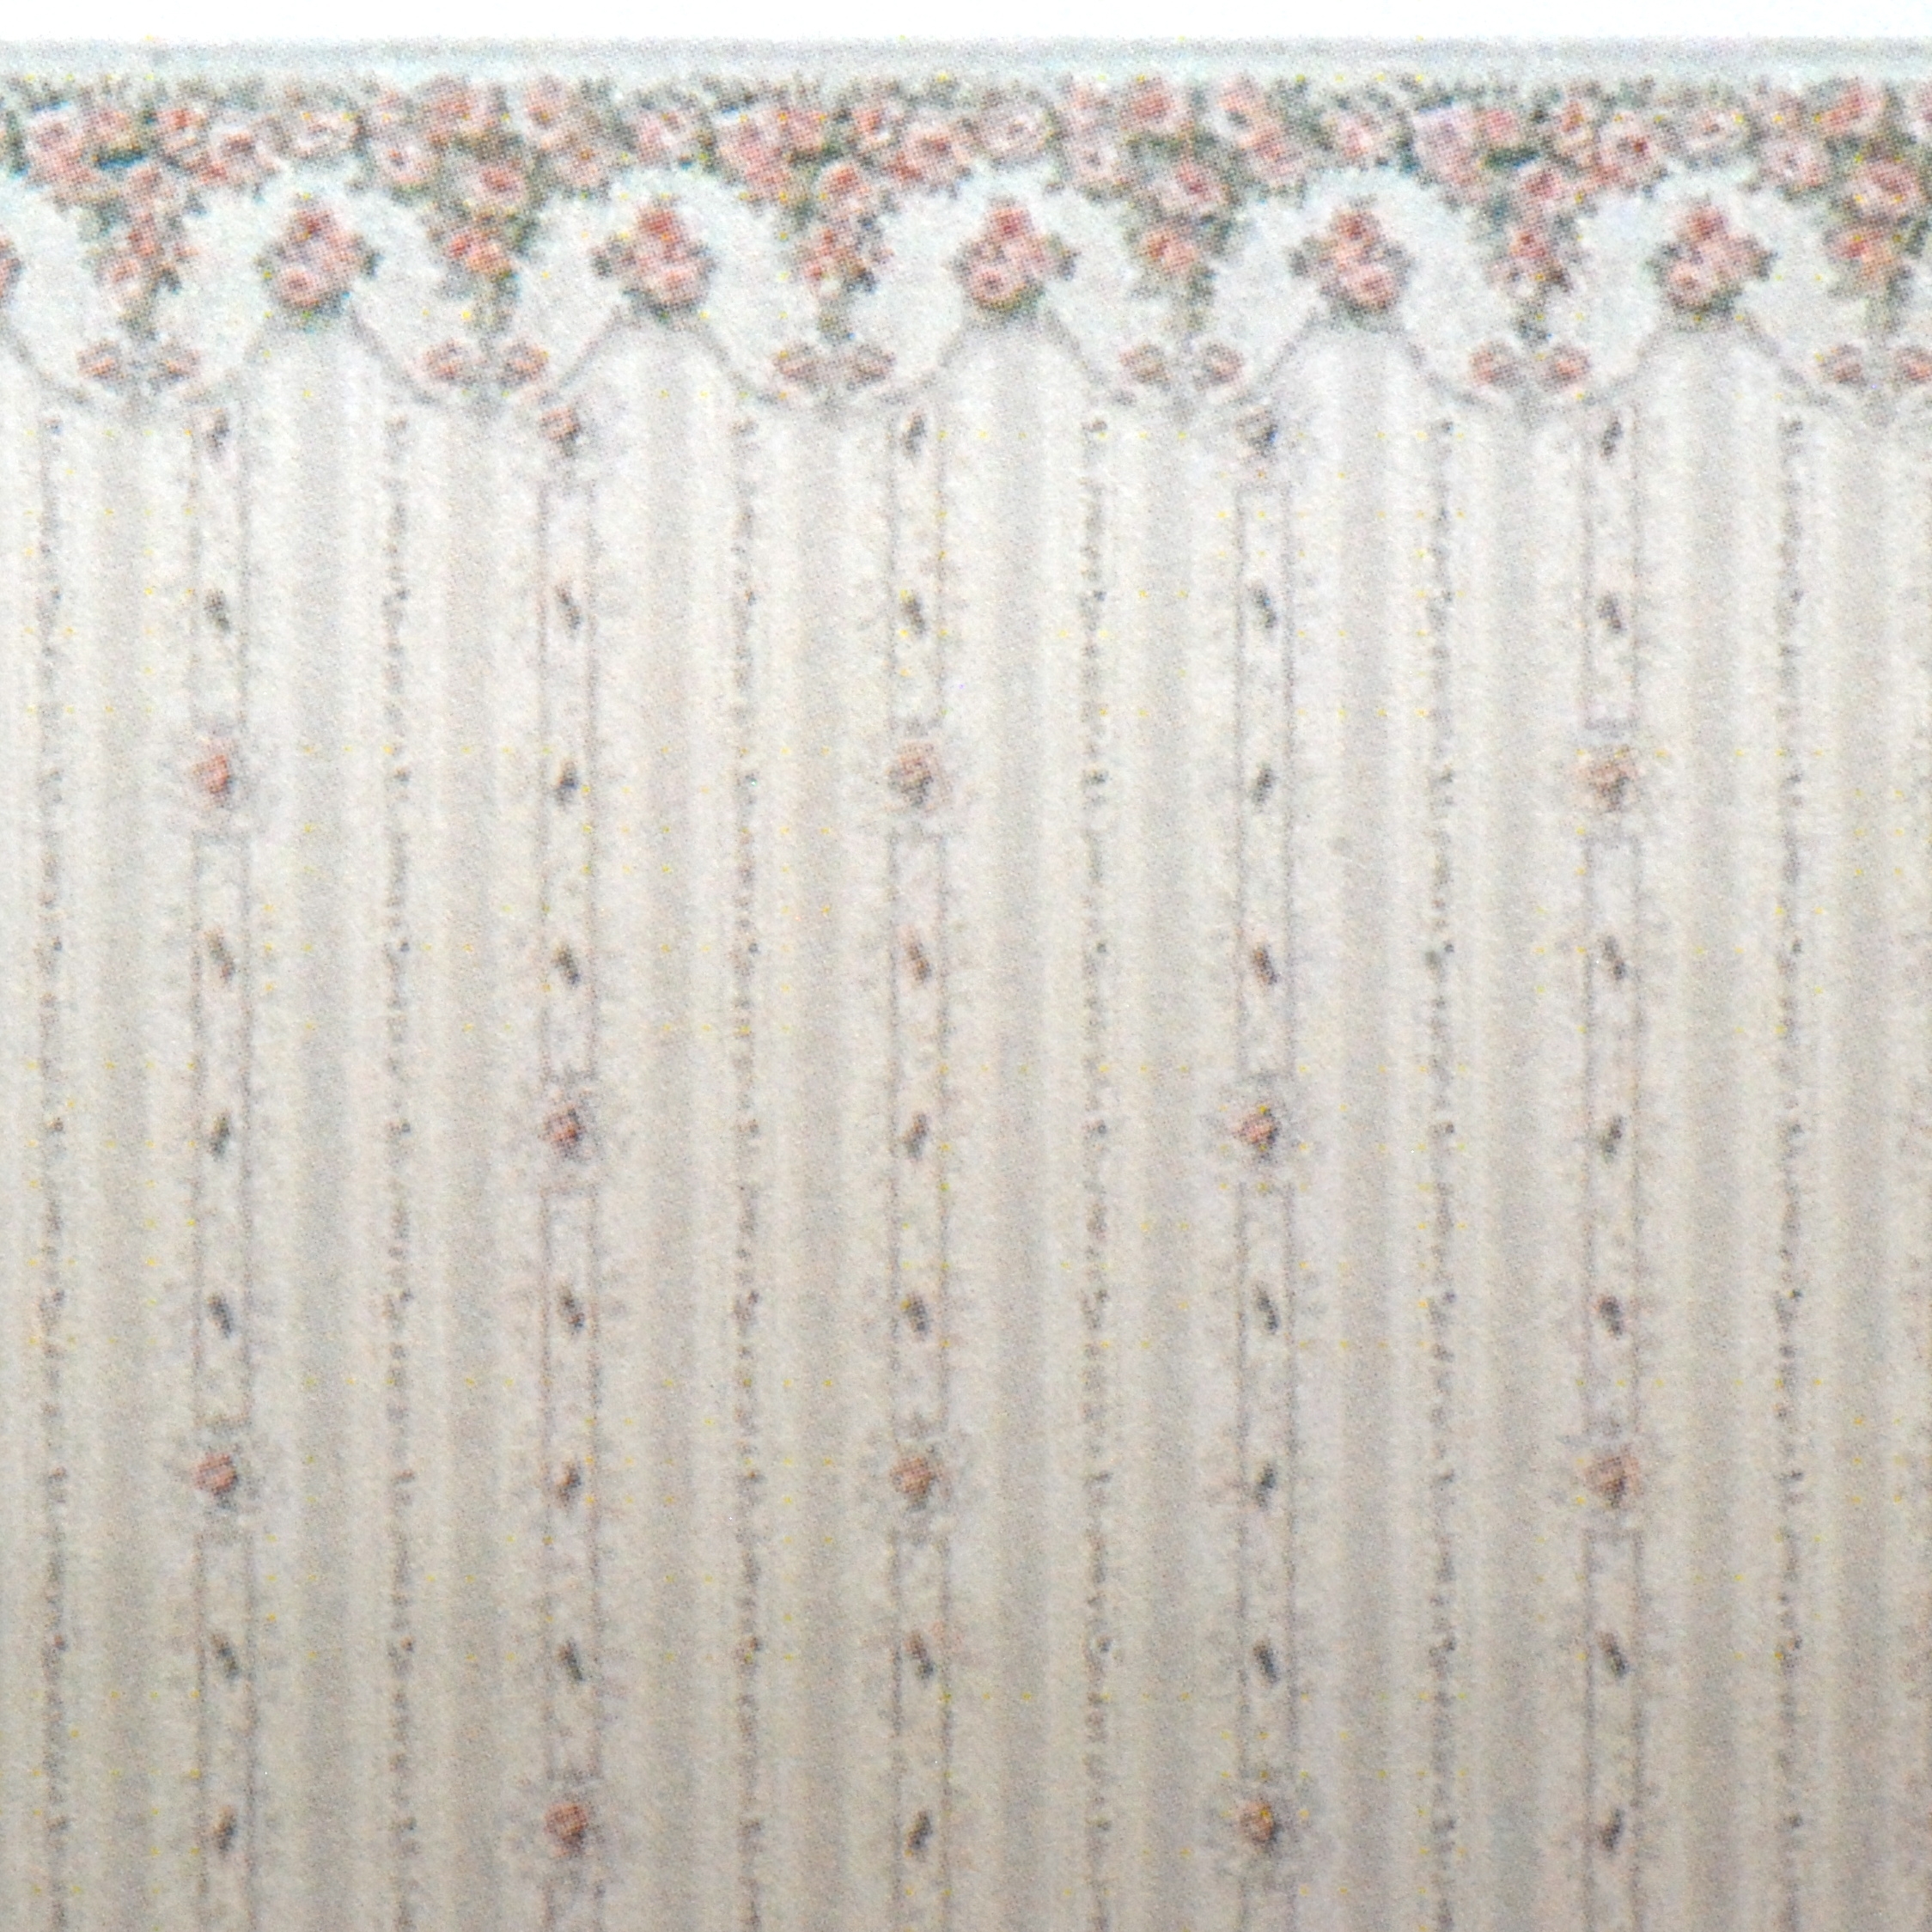 1/4" Scale Dollhouse Wallpaper 1:48 quarter scale 1930 Pink Rose Garlands 